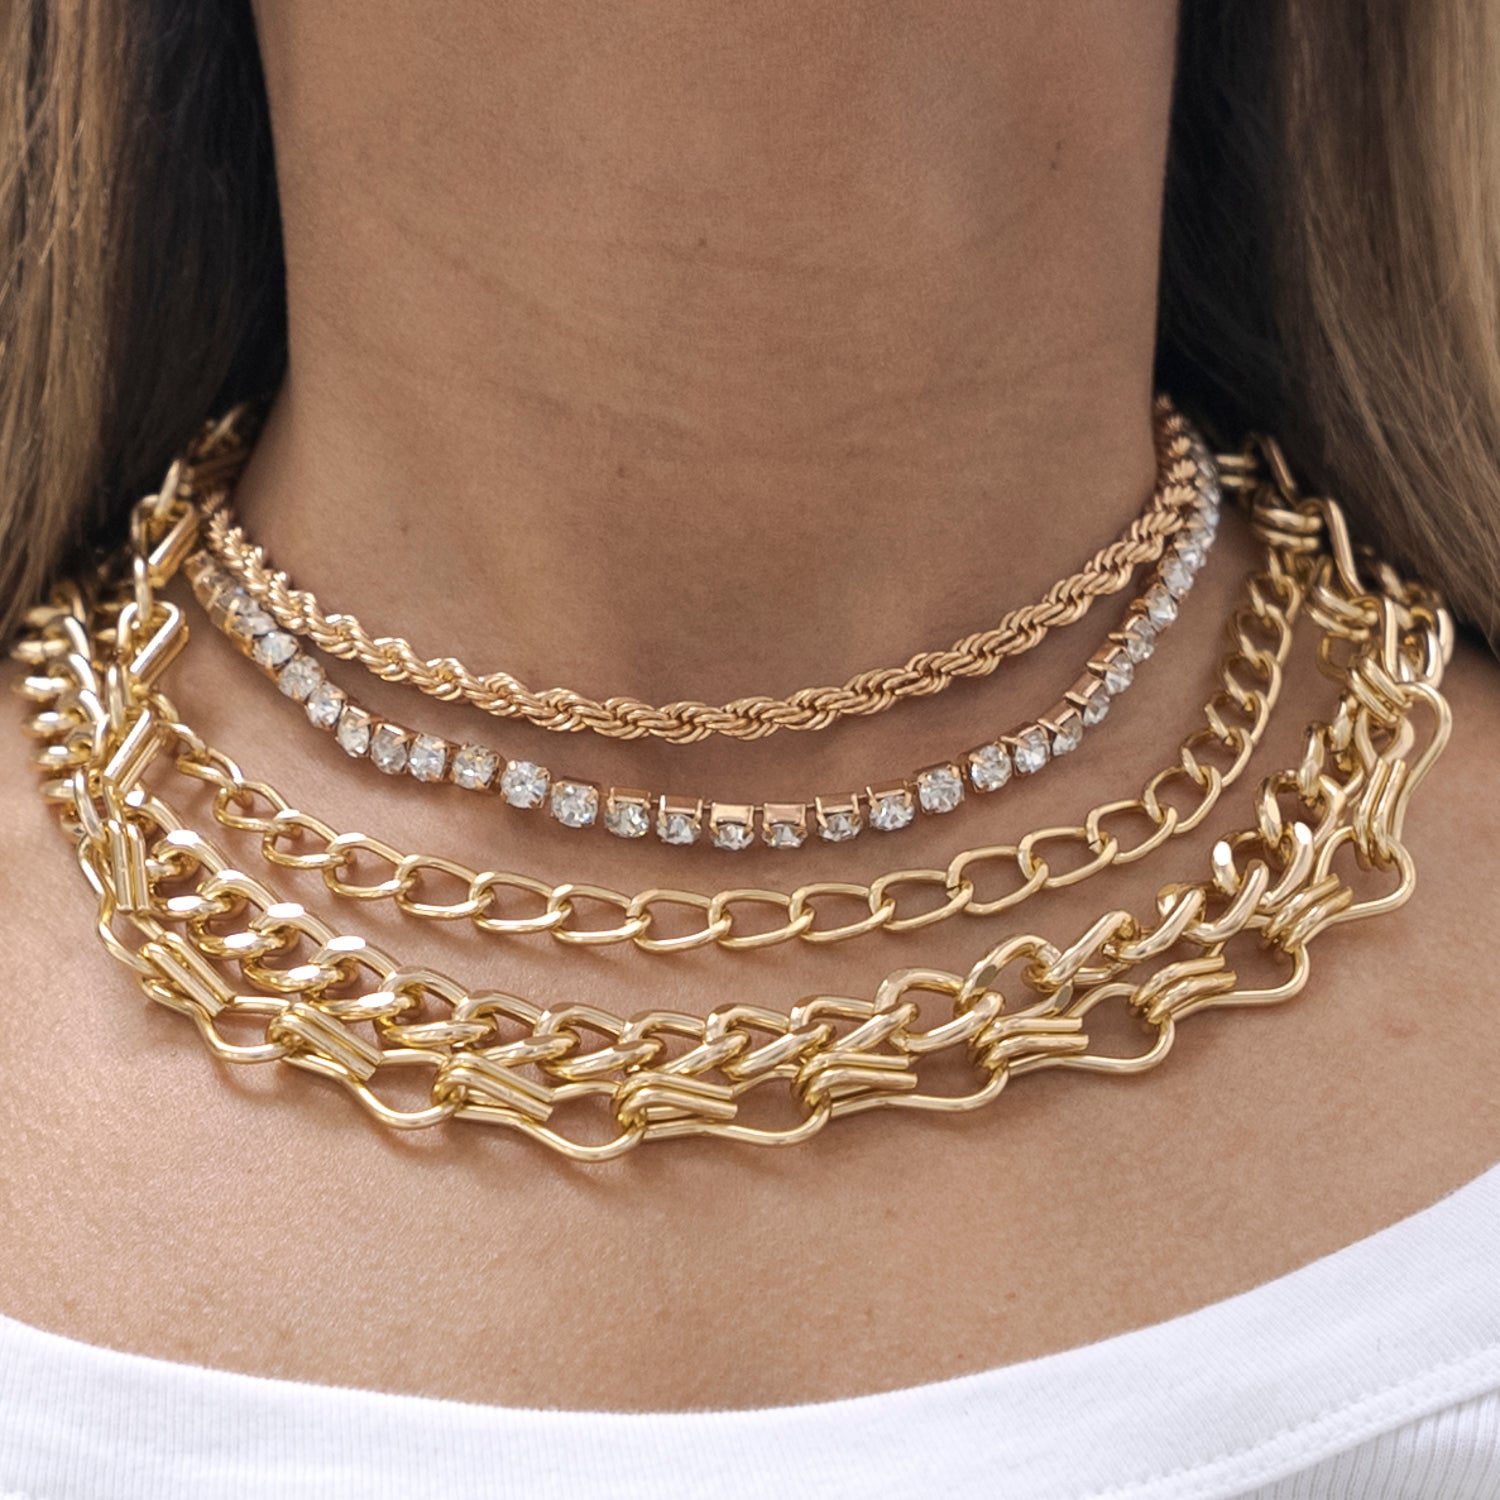 NECKLACE - 23395